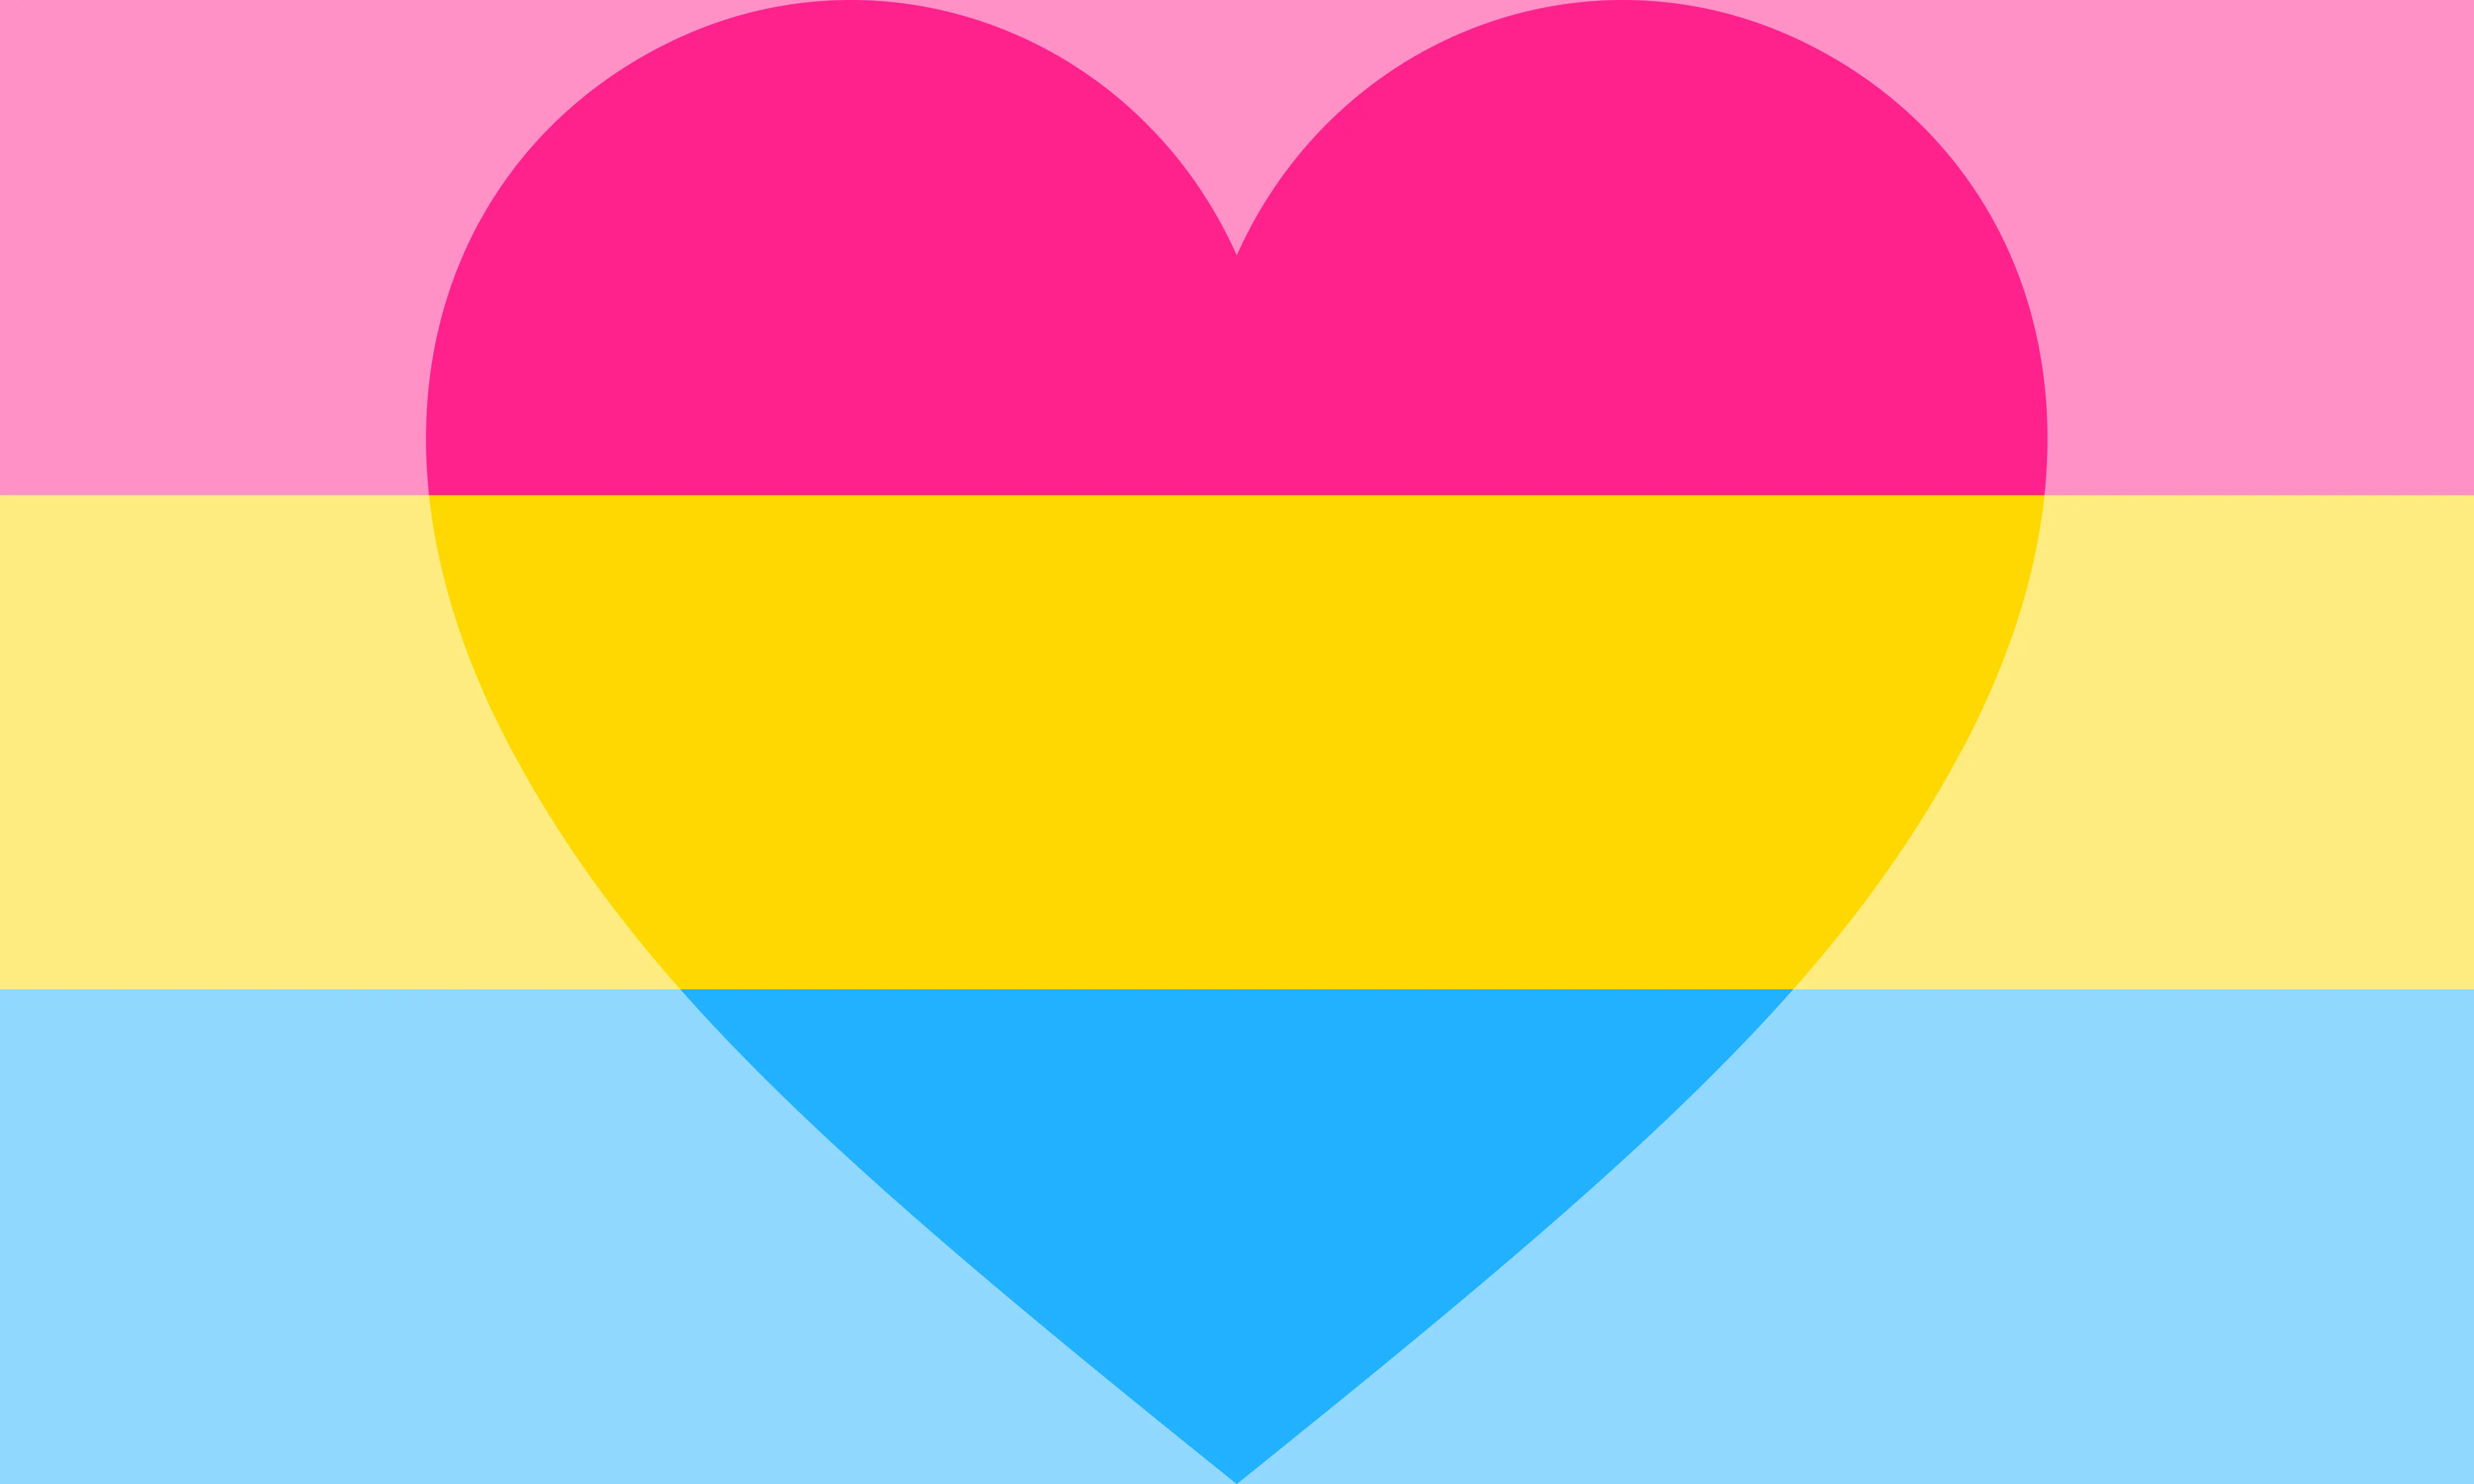 The panromantic pride flag. A field of three horizontal, coloured stripes (from top to bottom: magenta, yellow, and cyan). The entire flag has translucent white overlaid on top of it, except for a large heart-shaped cutout in the centre of the flag.